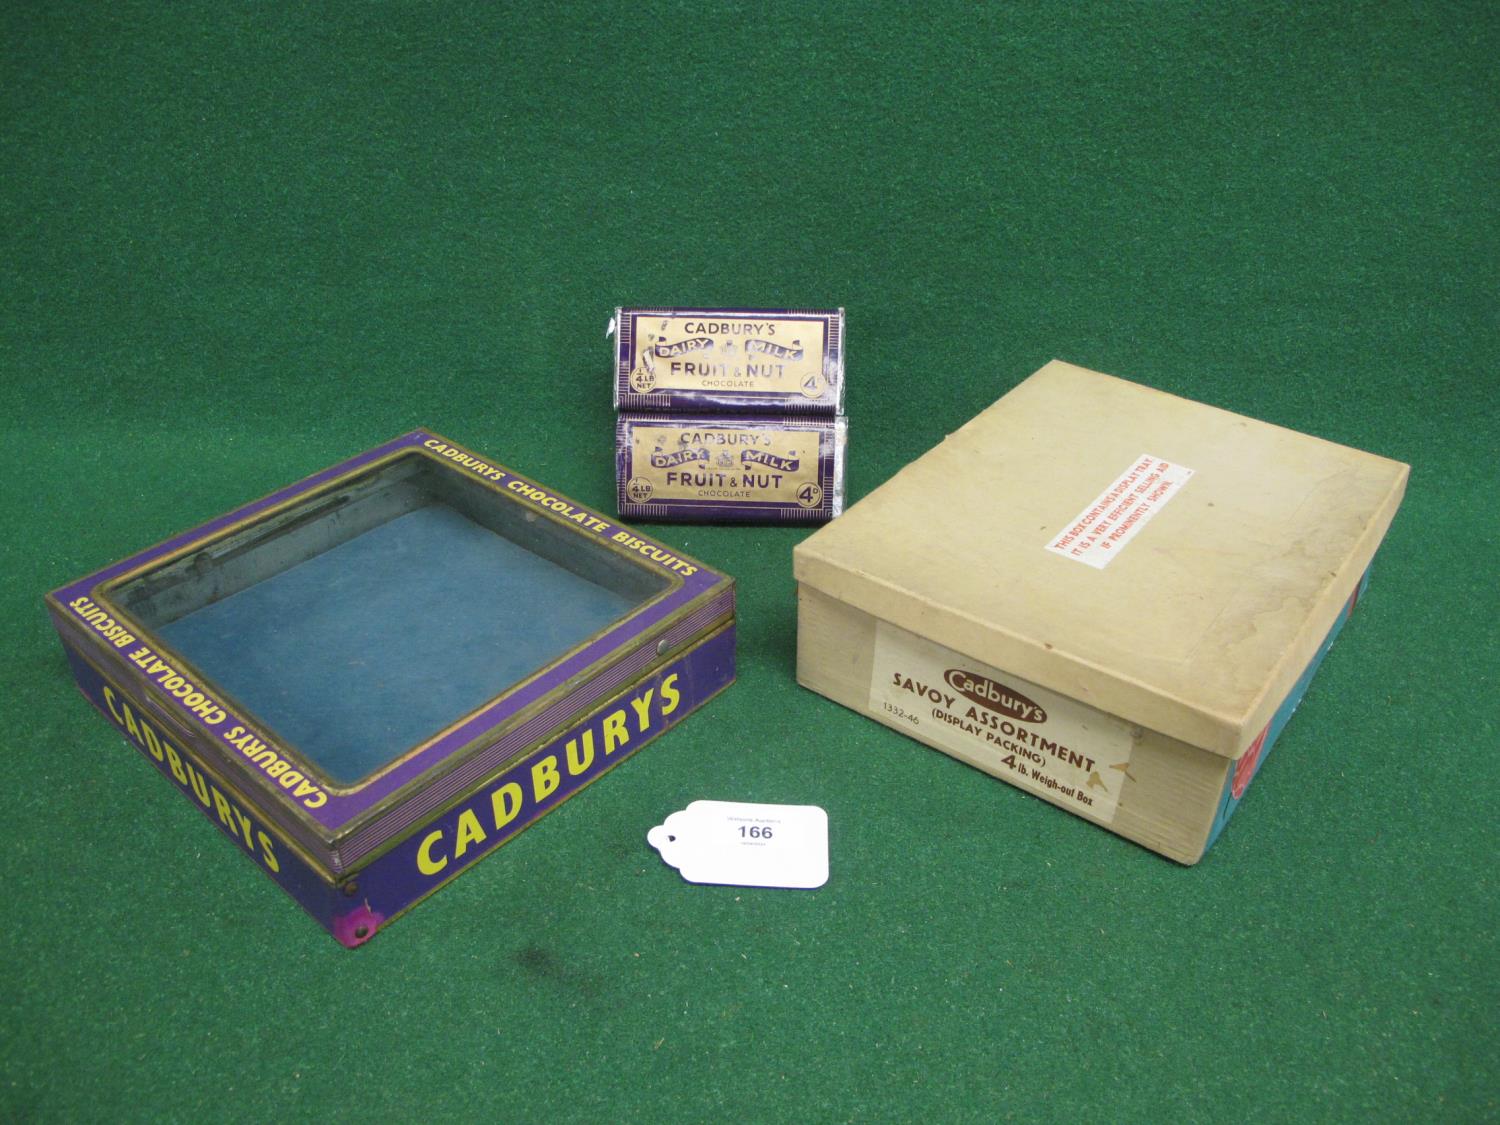 Cadbury - glass topped hinged biscuit tin - 9.25" x 8.75" x 2.5", cardboard display pack for Savoy - Image 3 of 3